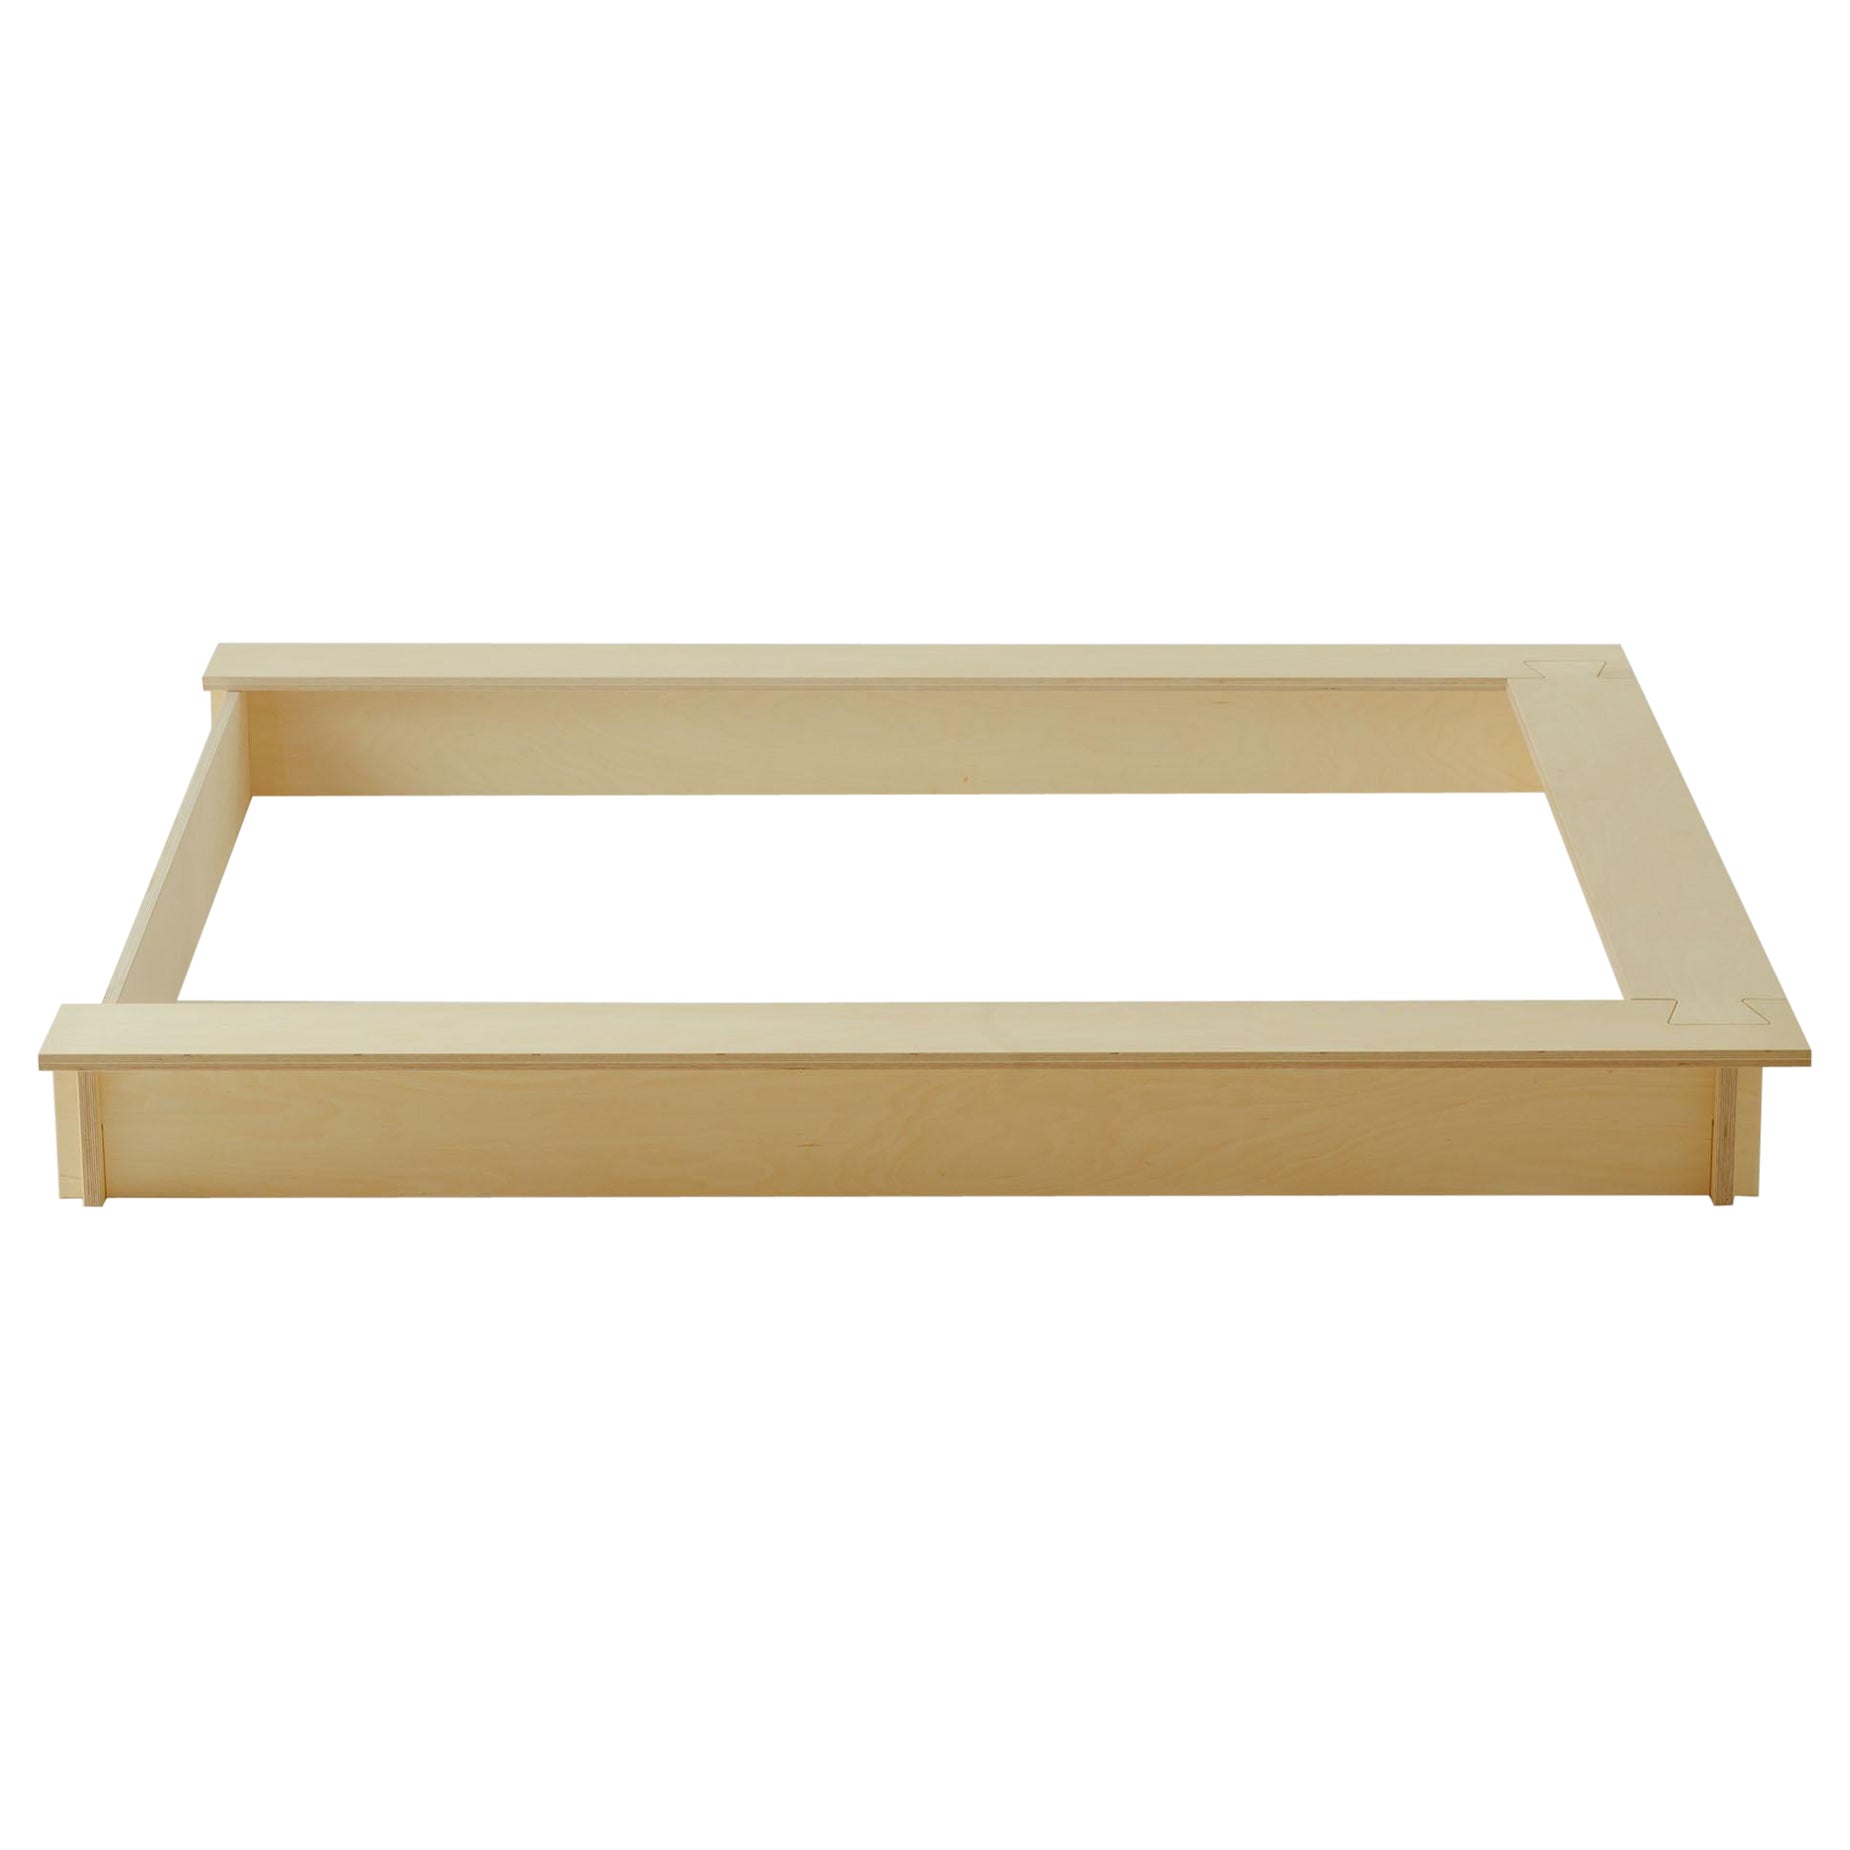 Minimalist Birch Dovetail Bed, Judd Style - by The Future is Flat